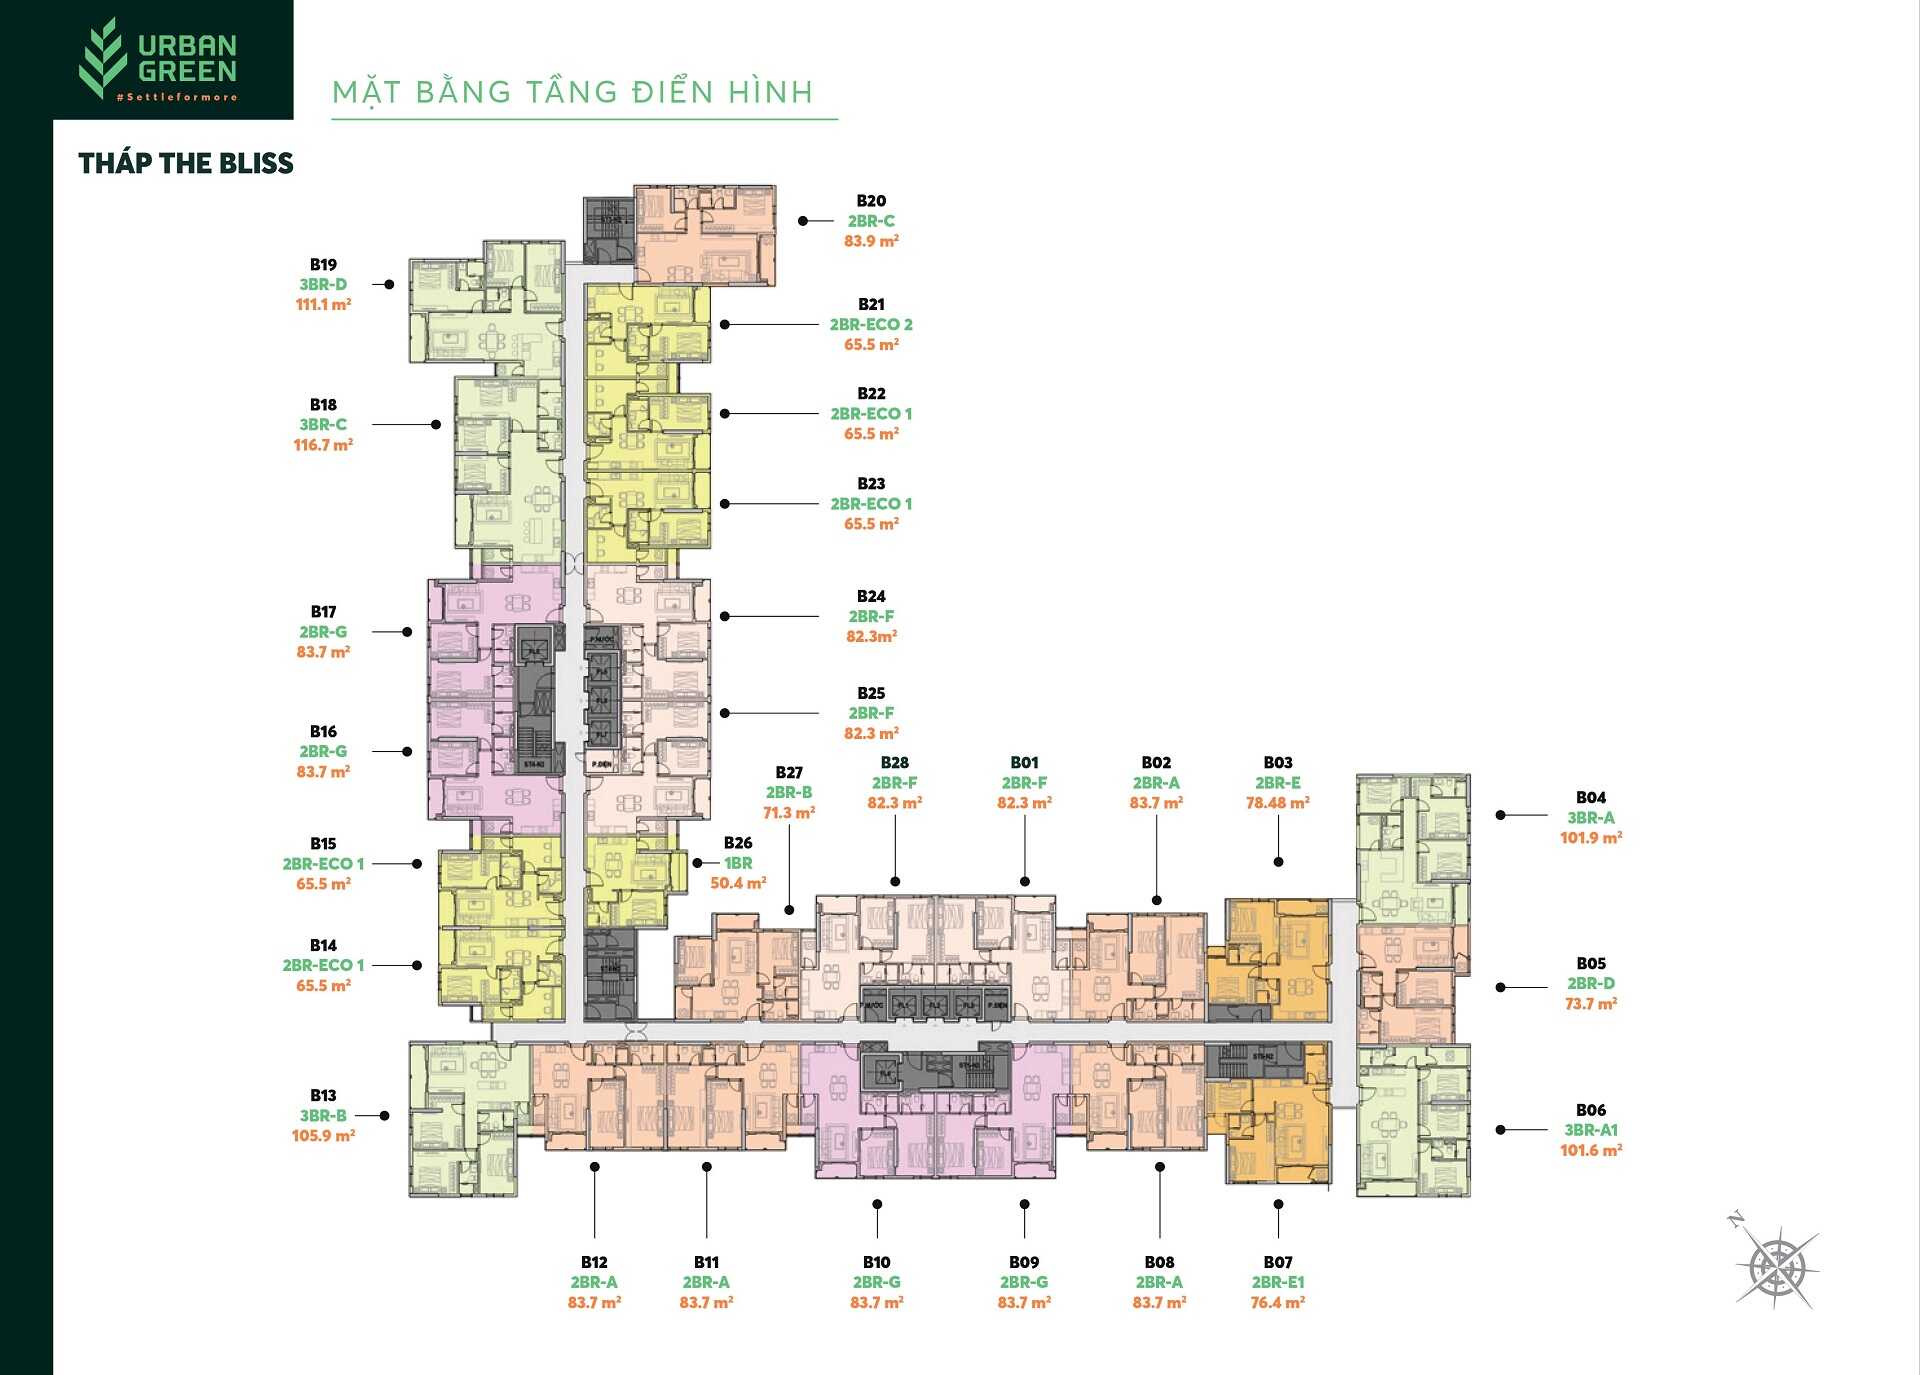 The typical floor layout of The Bliss tower